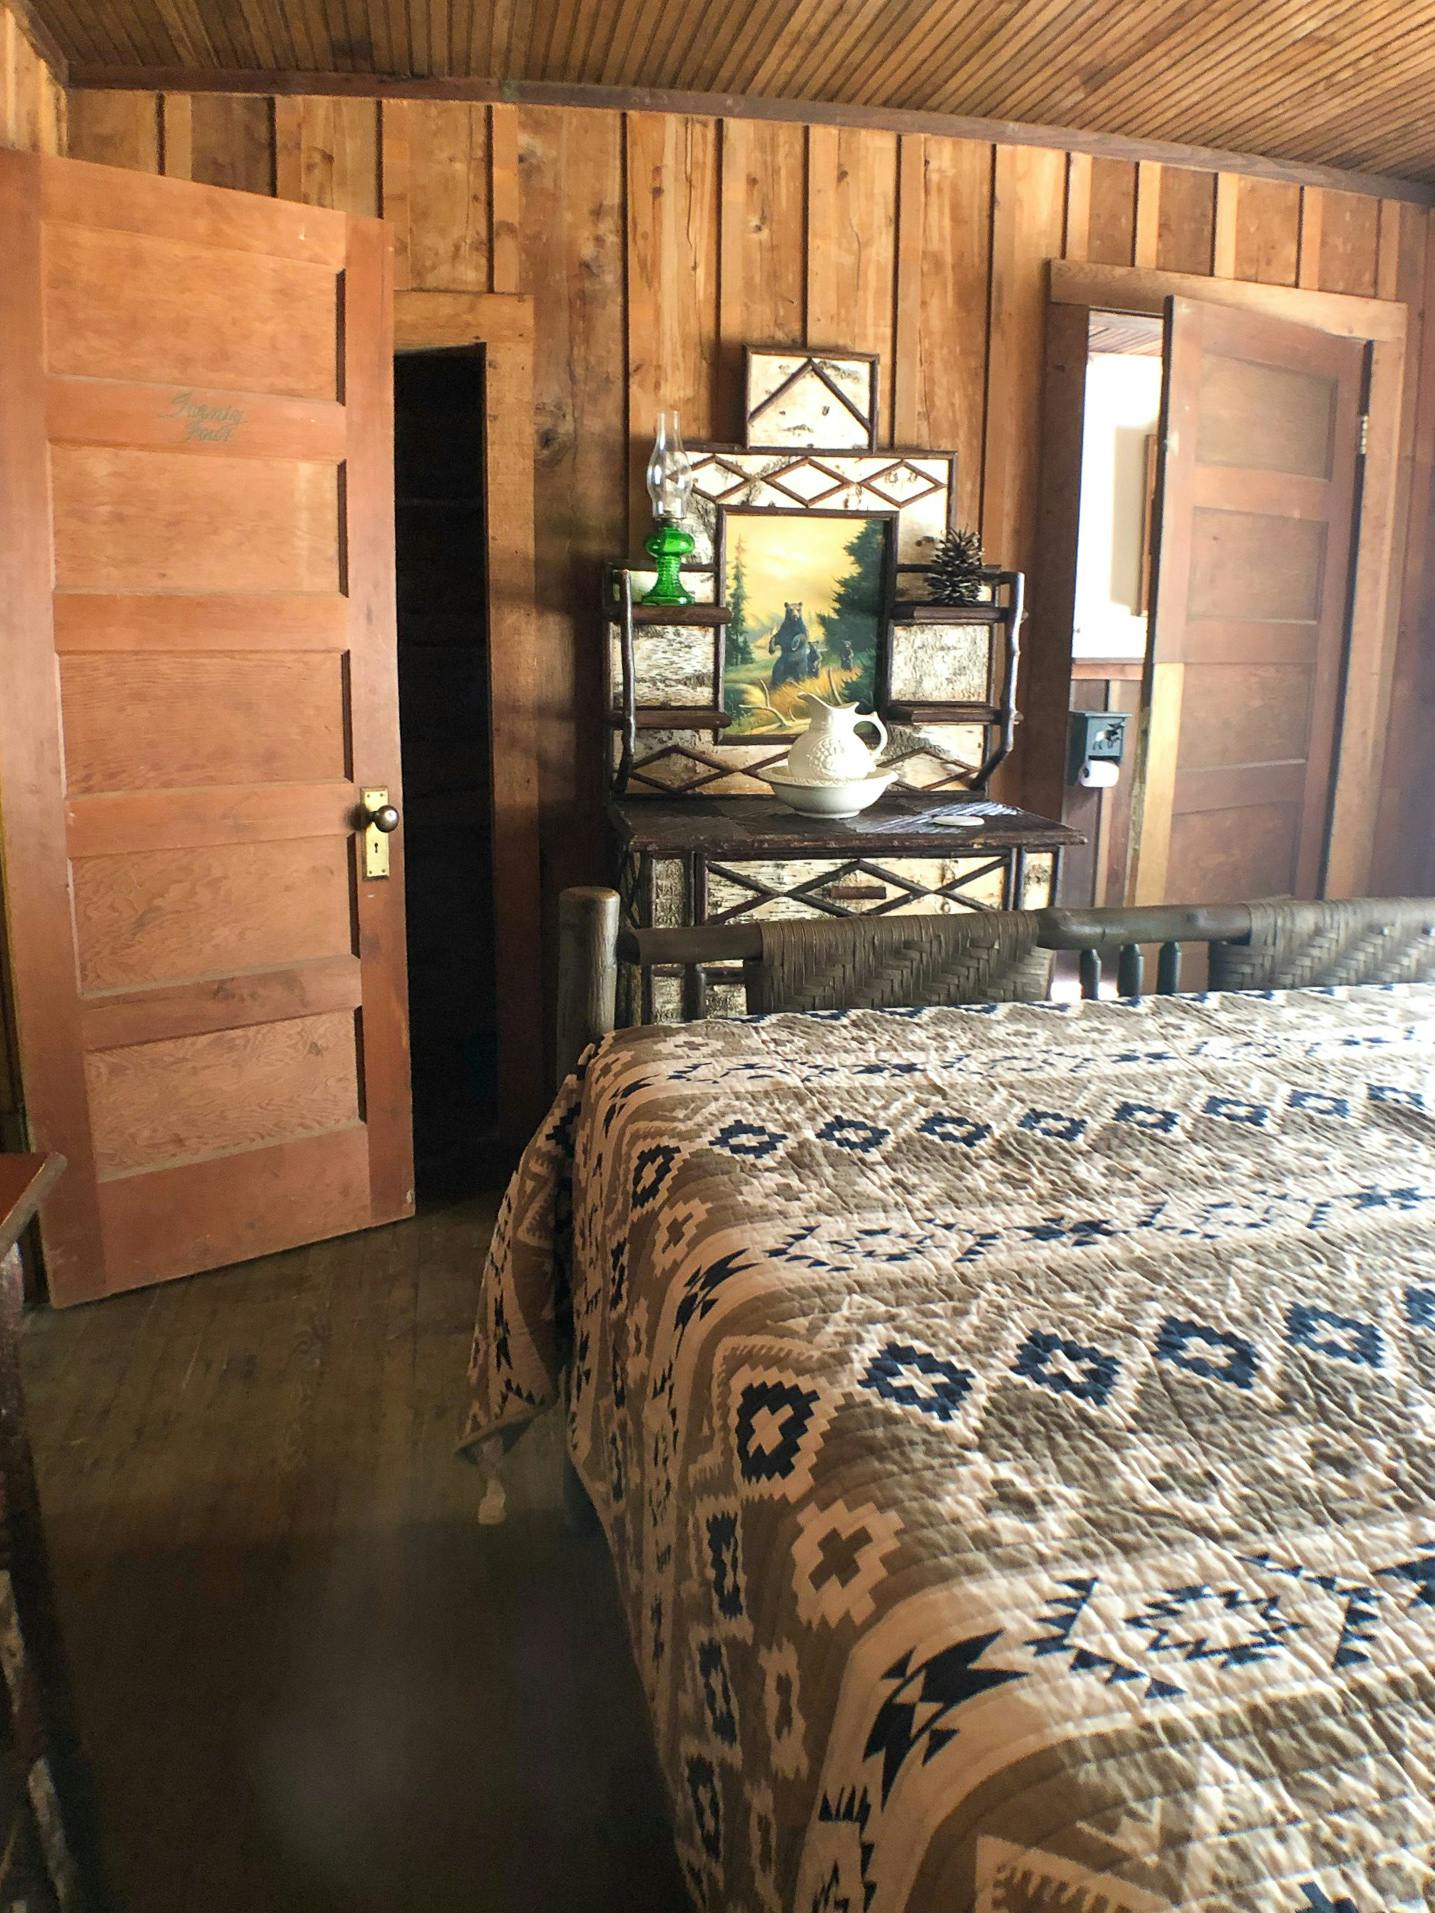 Rustic bedroom with a patterned bedspread, wooden doors, and a dresser with decorative items.